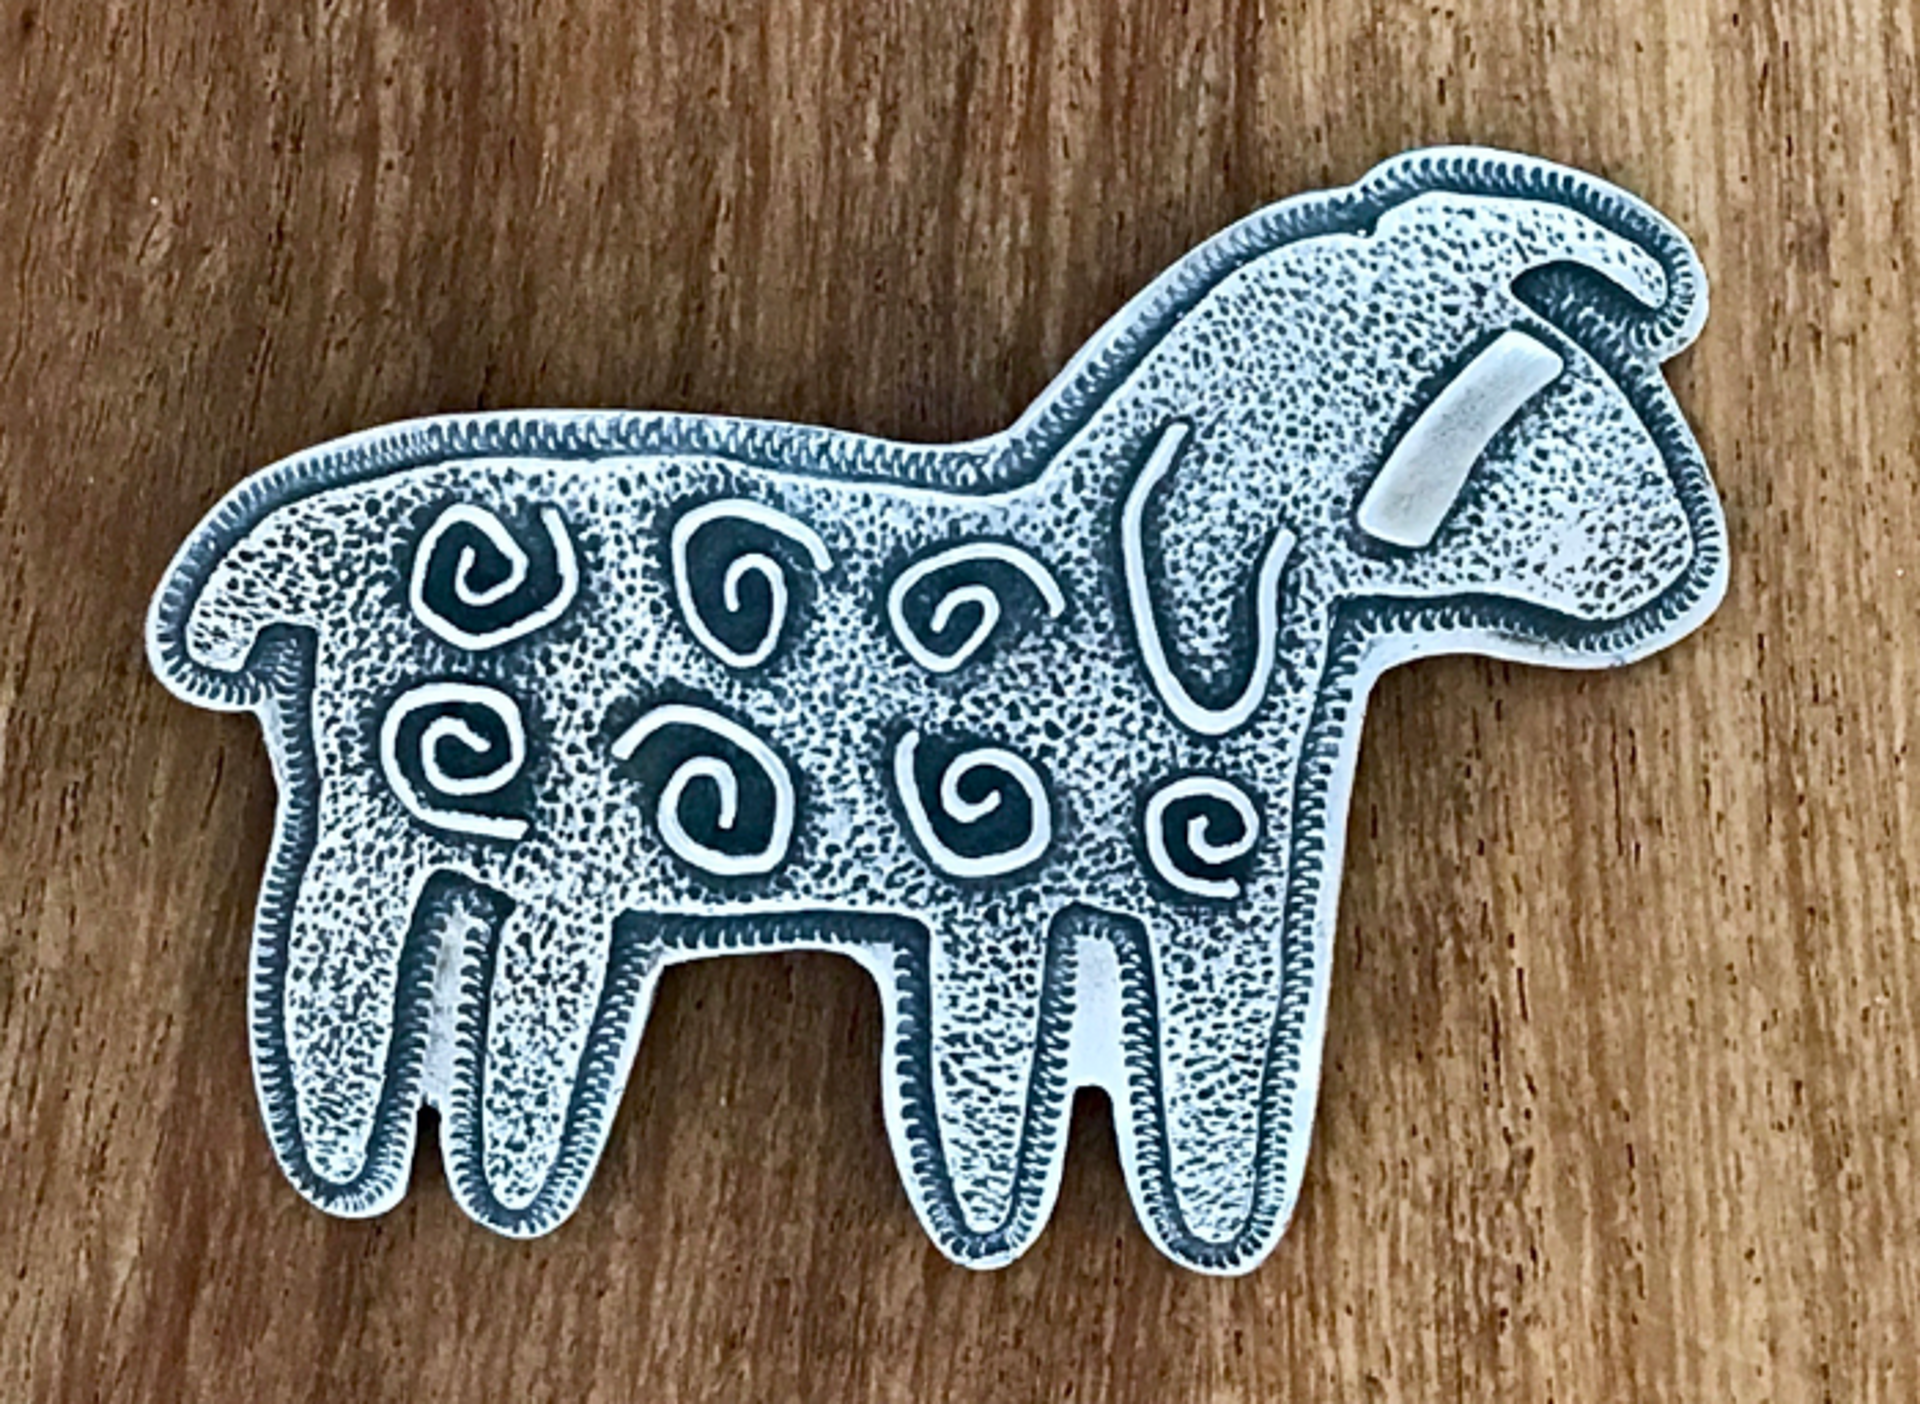 Curly Sheep Pendant by Melanie A. Yazzie